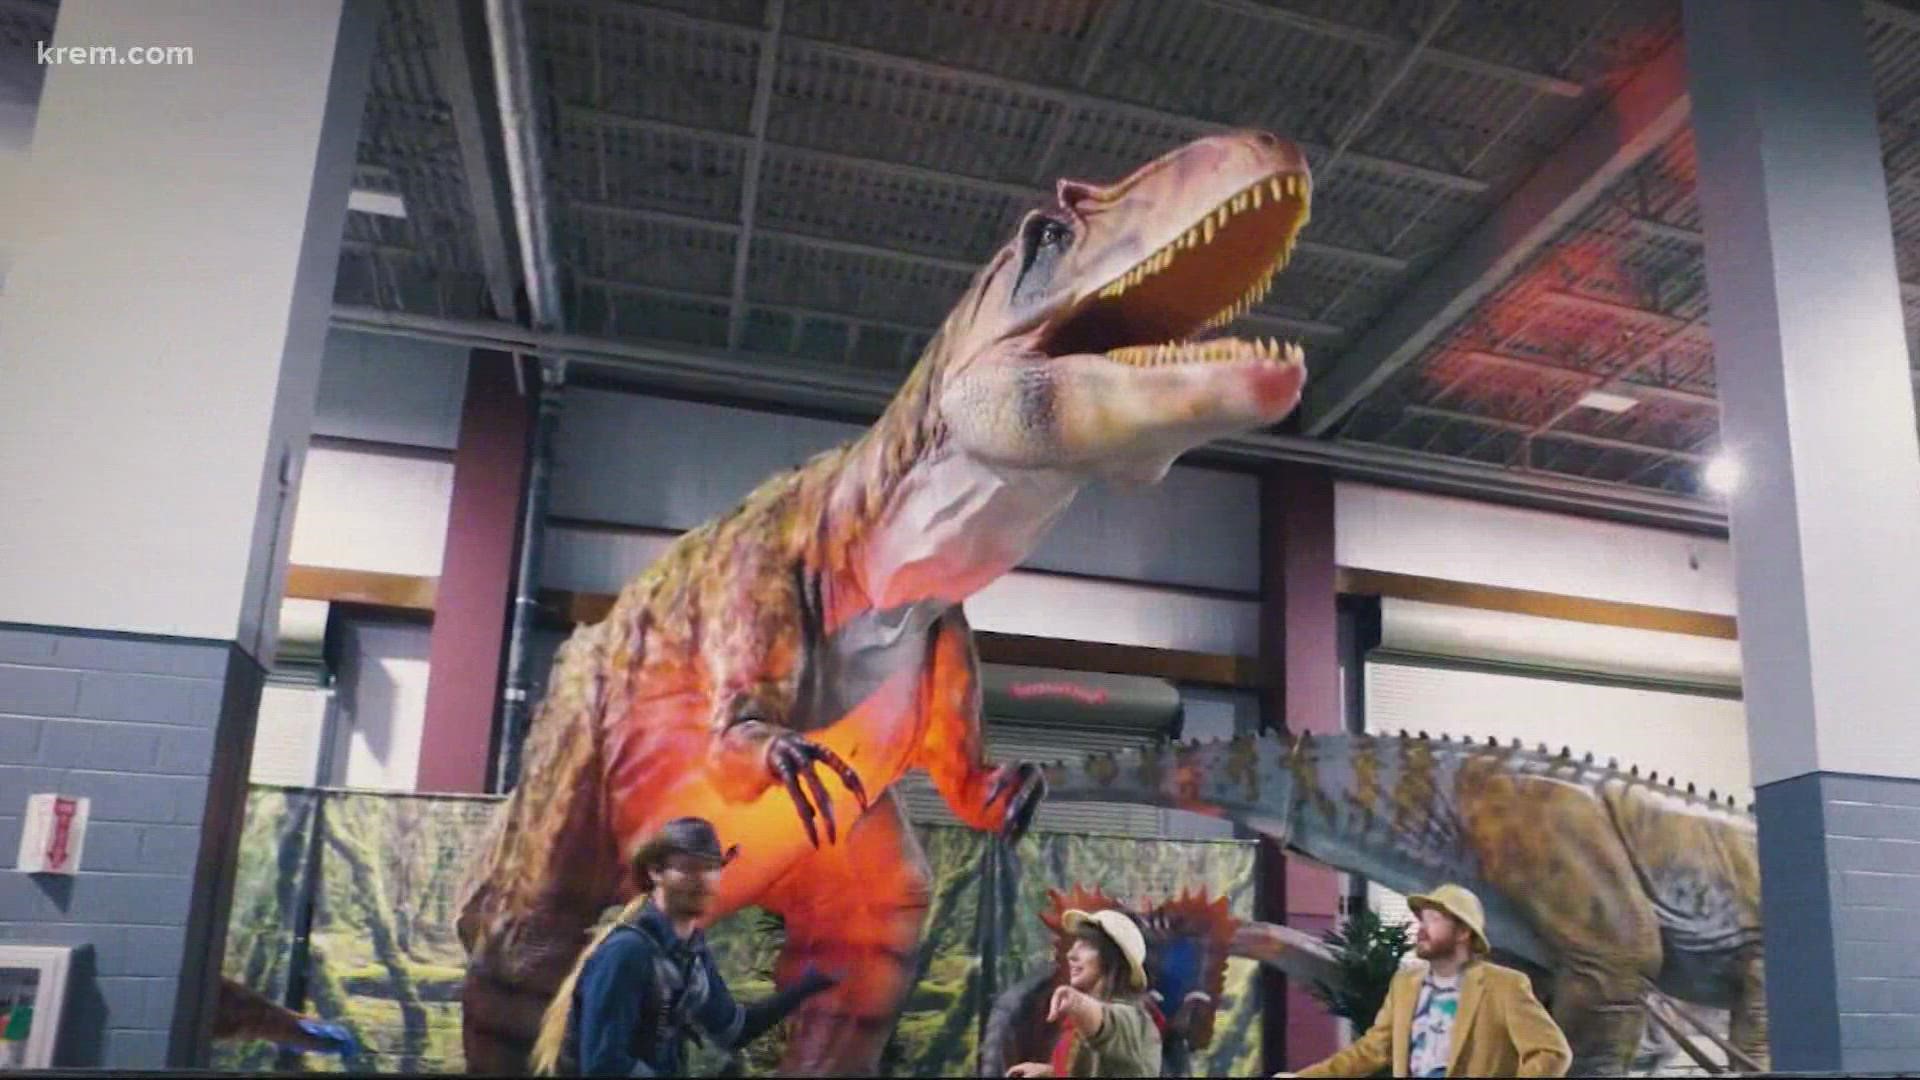 KREM 2 Meteorologist Thomas Patrick visited the Jurassic Quest exhibit that will be returning to the Spokane Convention Center this December 3-5 for more family fun.